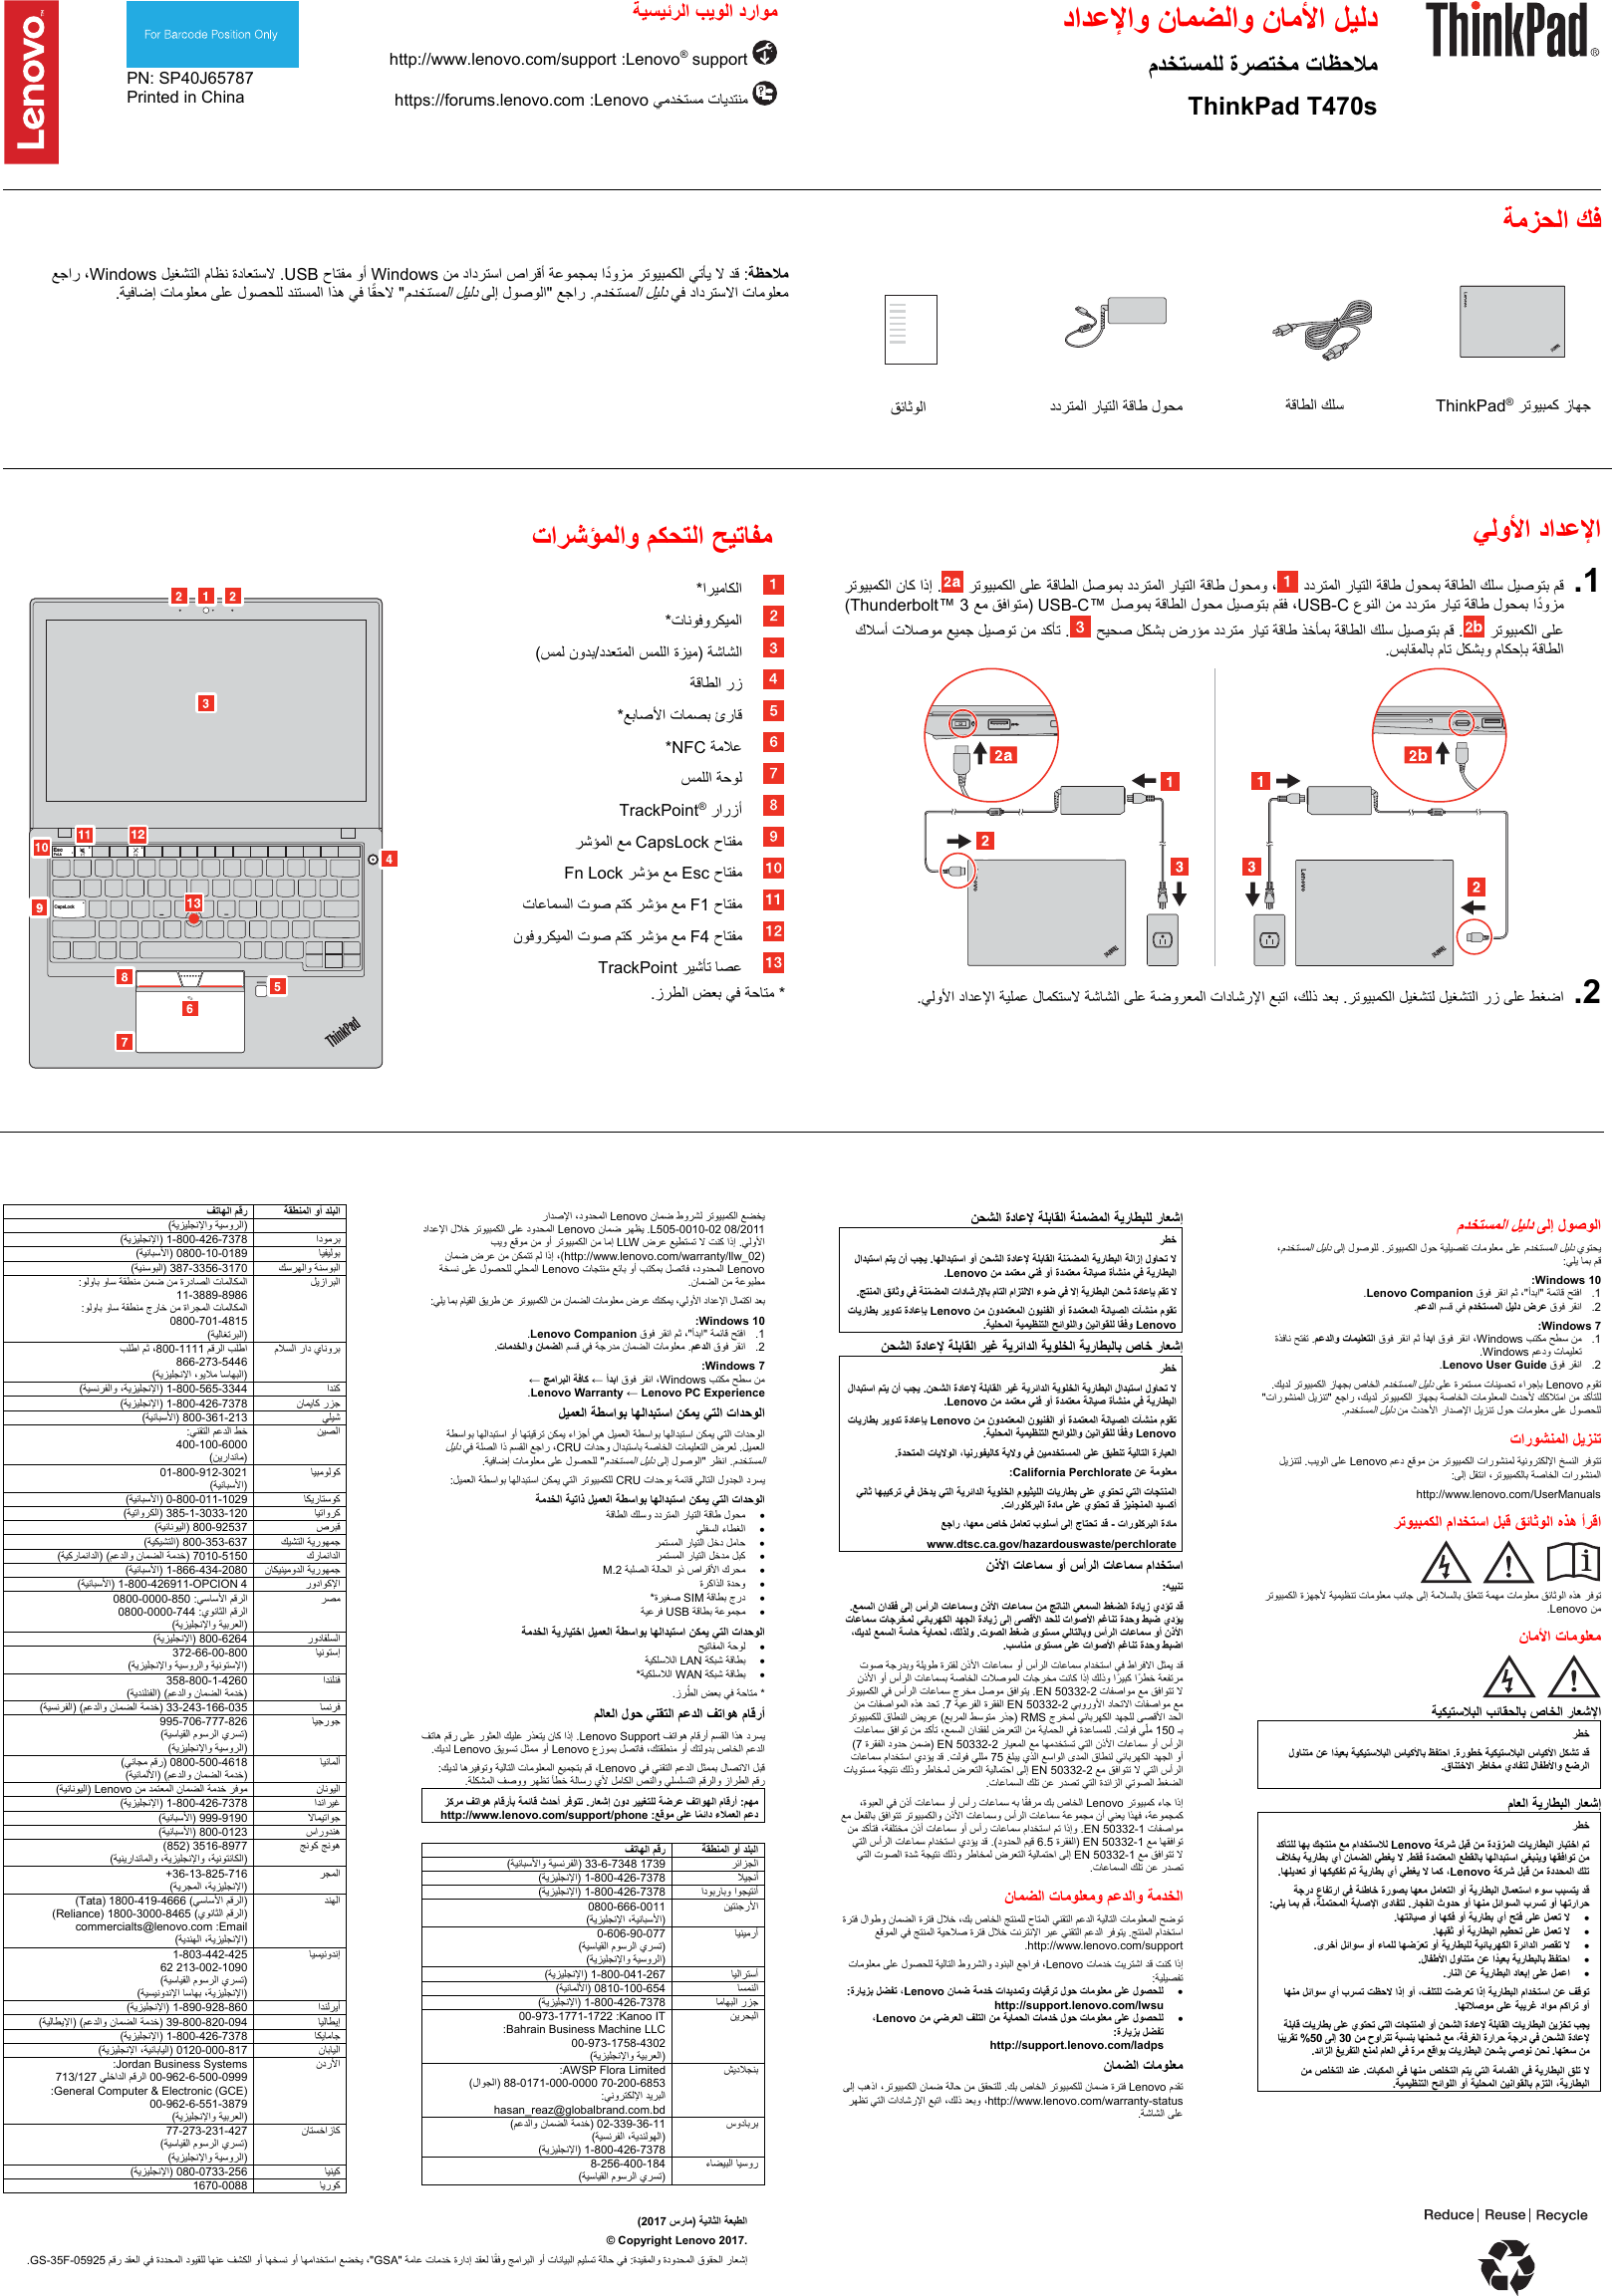 Page 1 of 2 - Lenovo T470S Swsg Ar Sp40J65787 - T470s_swsg_ar_sp40j65787x User Manual (Arabic) Safety, Warranty And Setup Guide Think Pad Laptop (type 20HF, 20HG) (Think Pad) Type 20HG